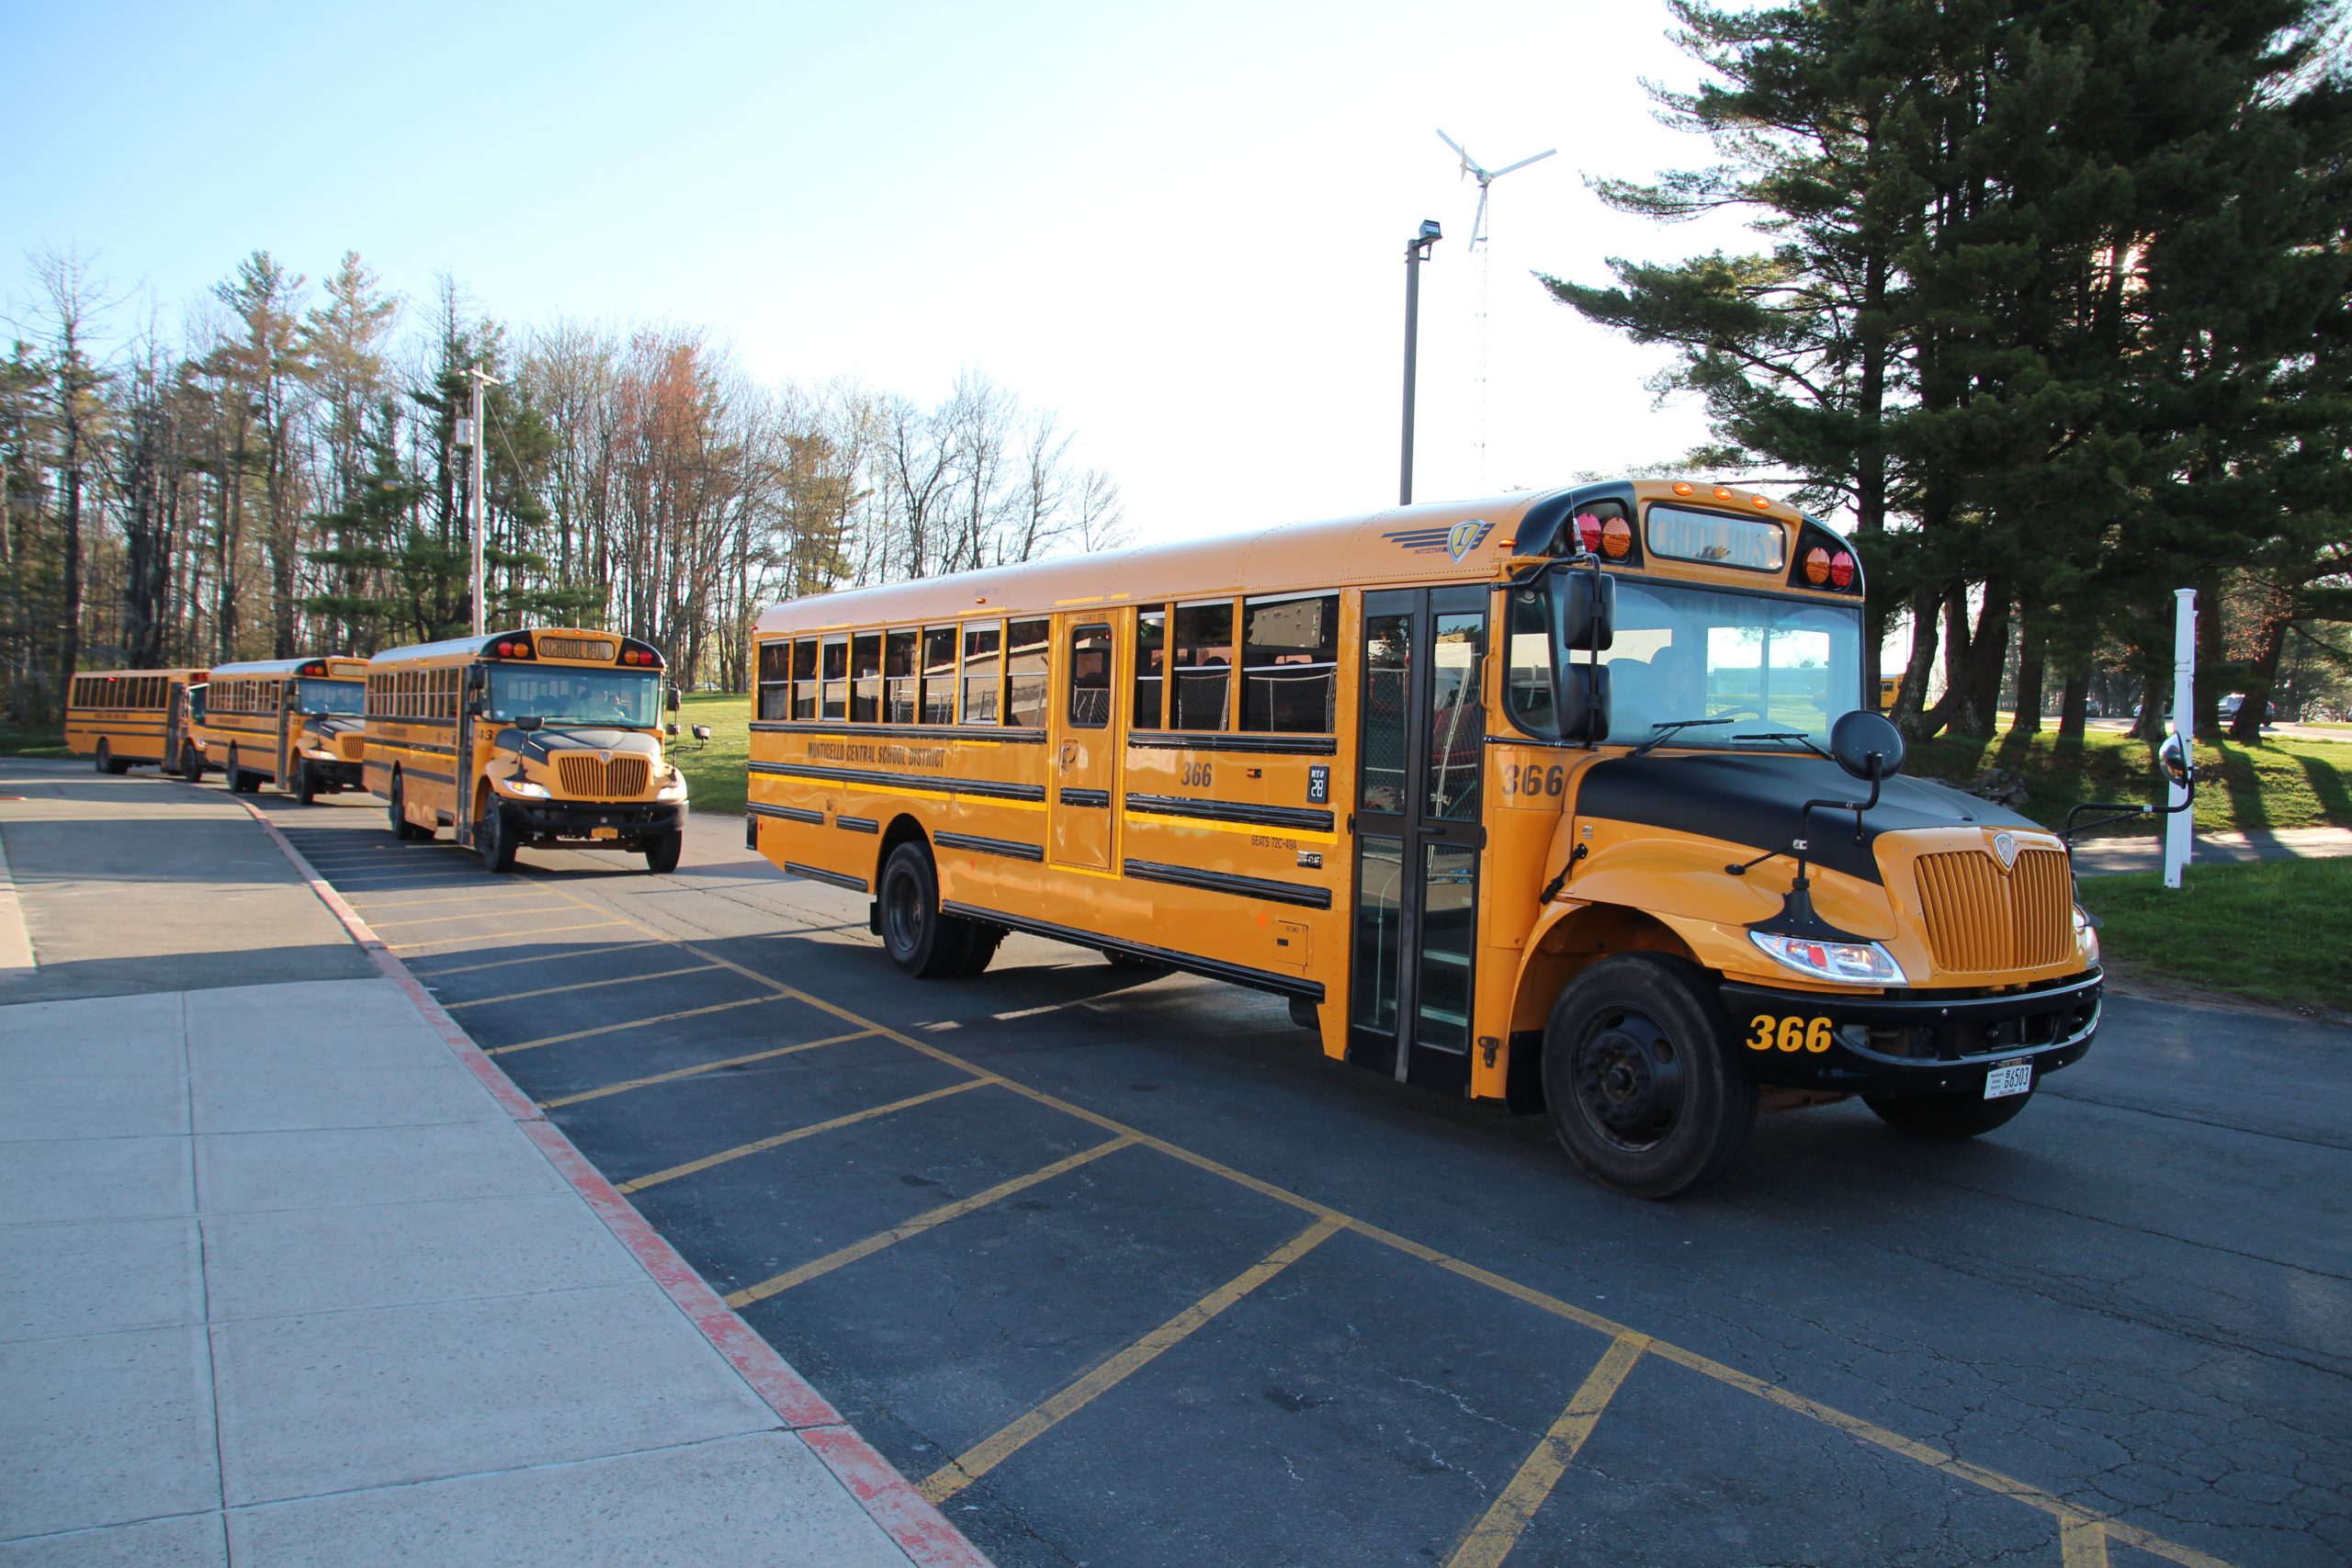 A school bus is parked in the school's parking lot.